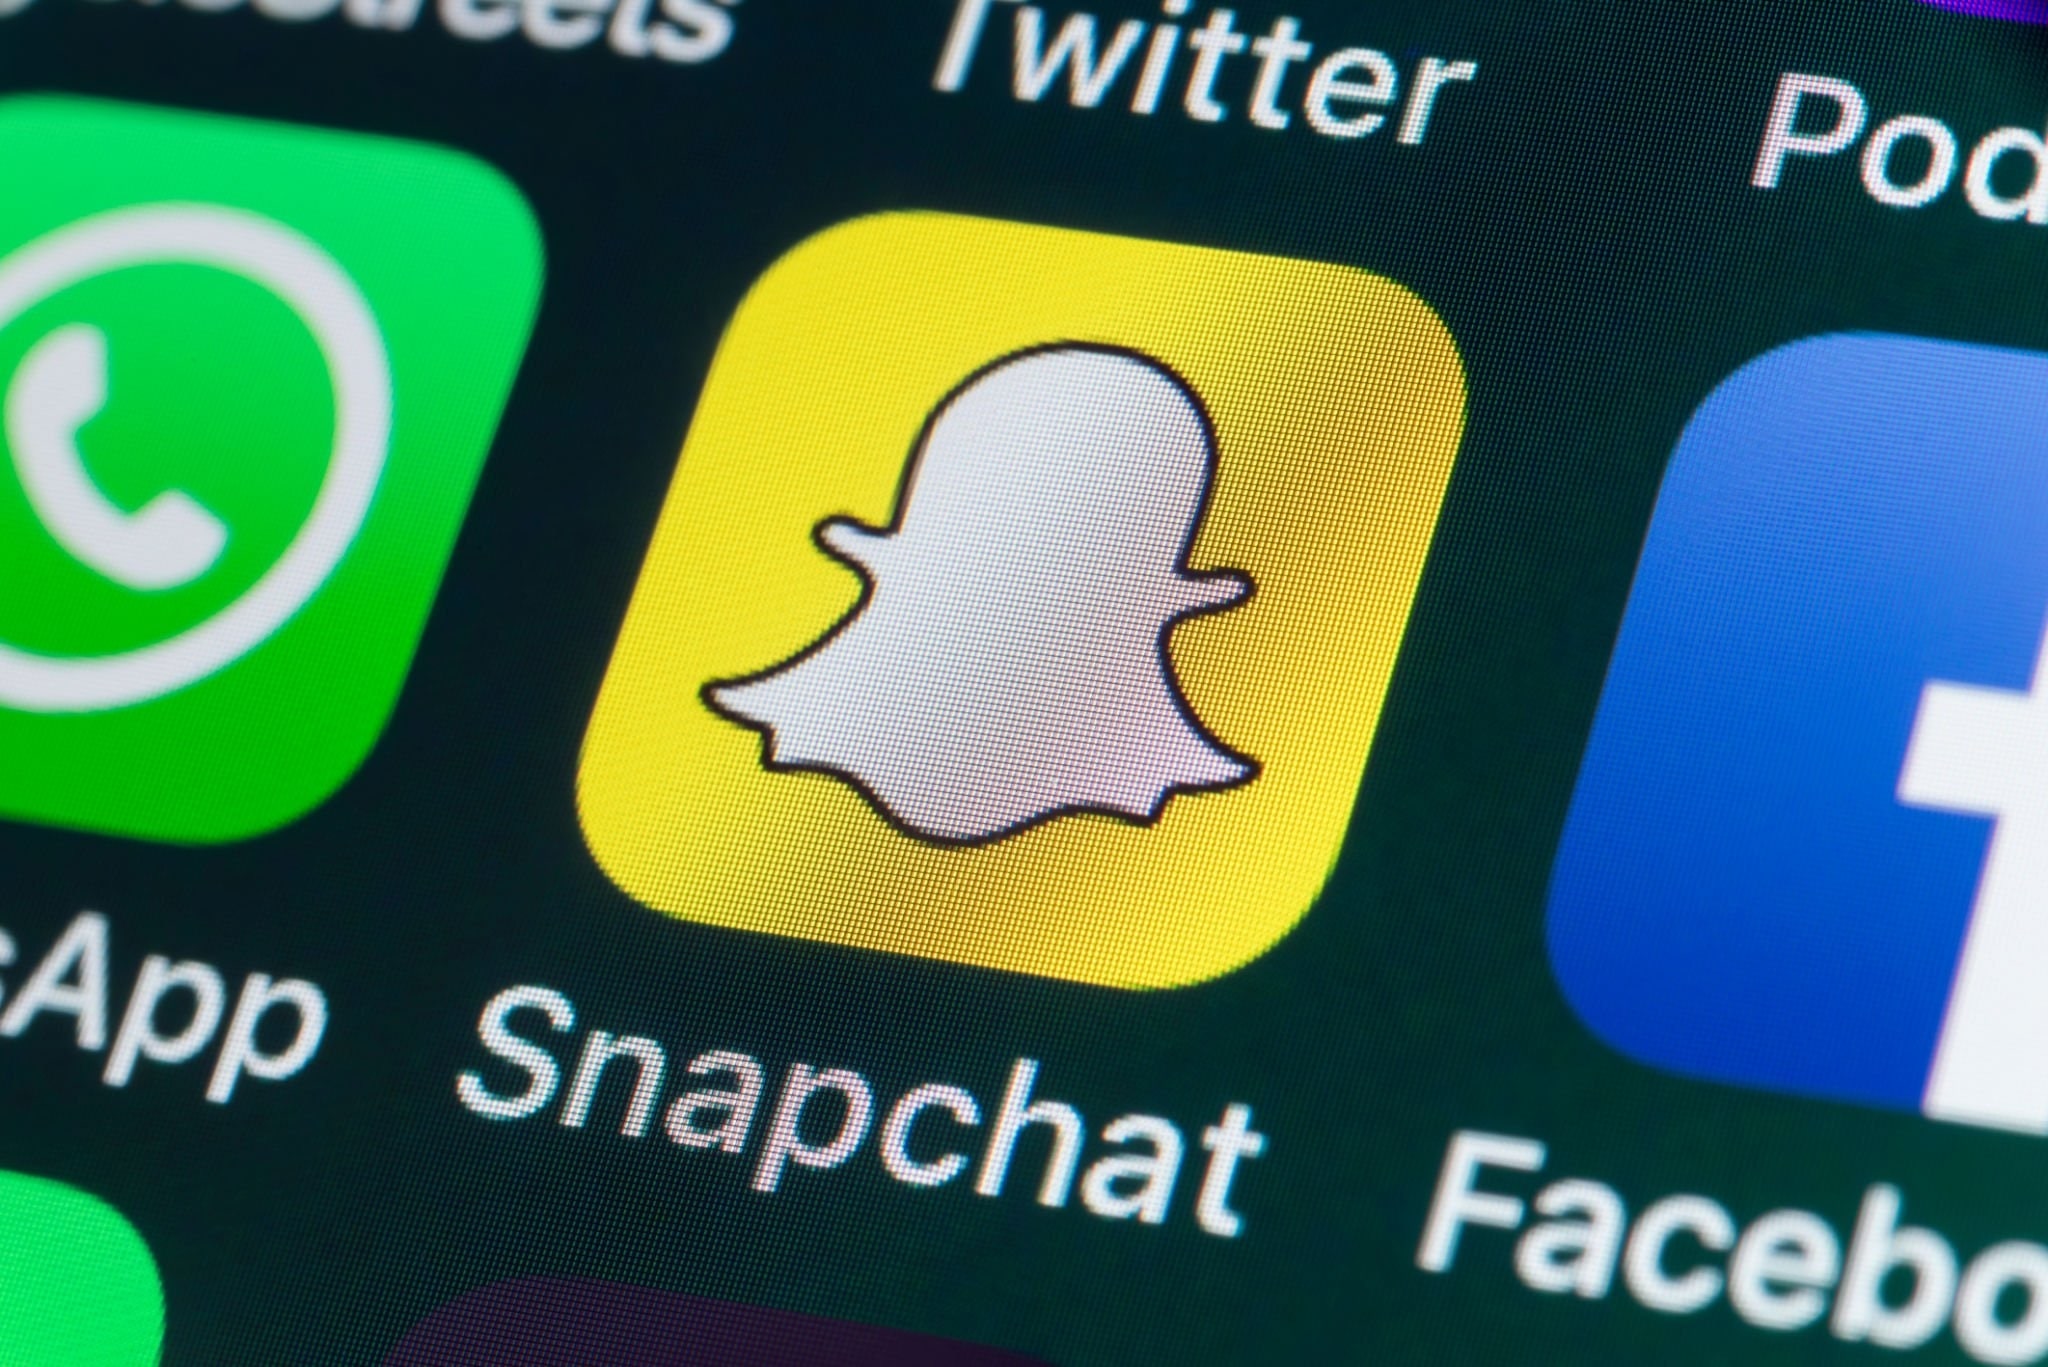 7 Snapchat Problems iPhone Users Might Experience